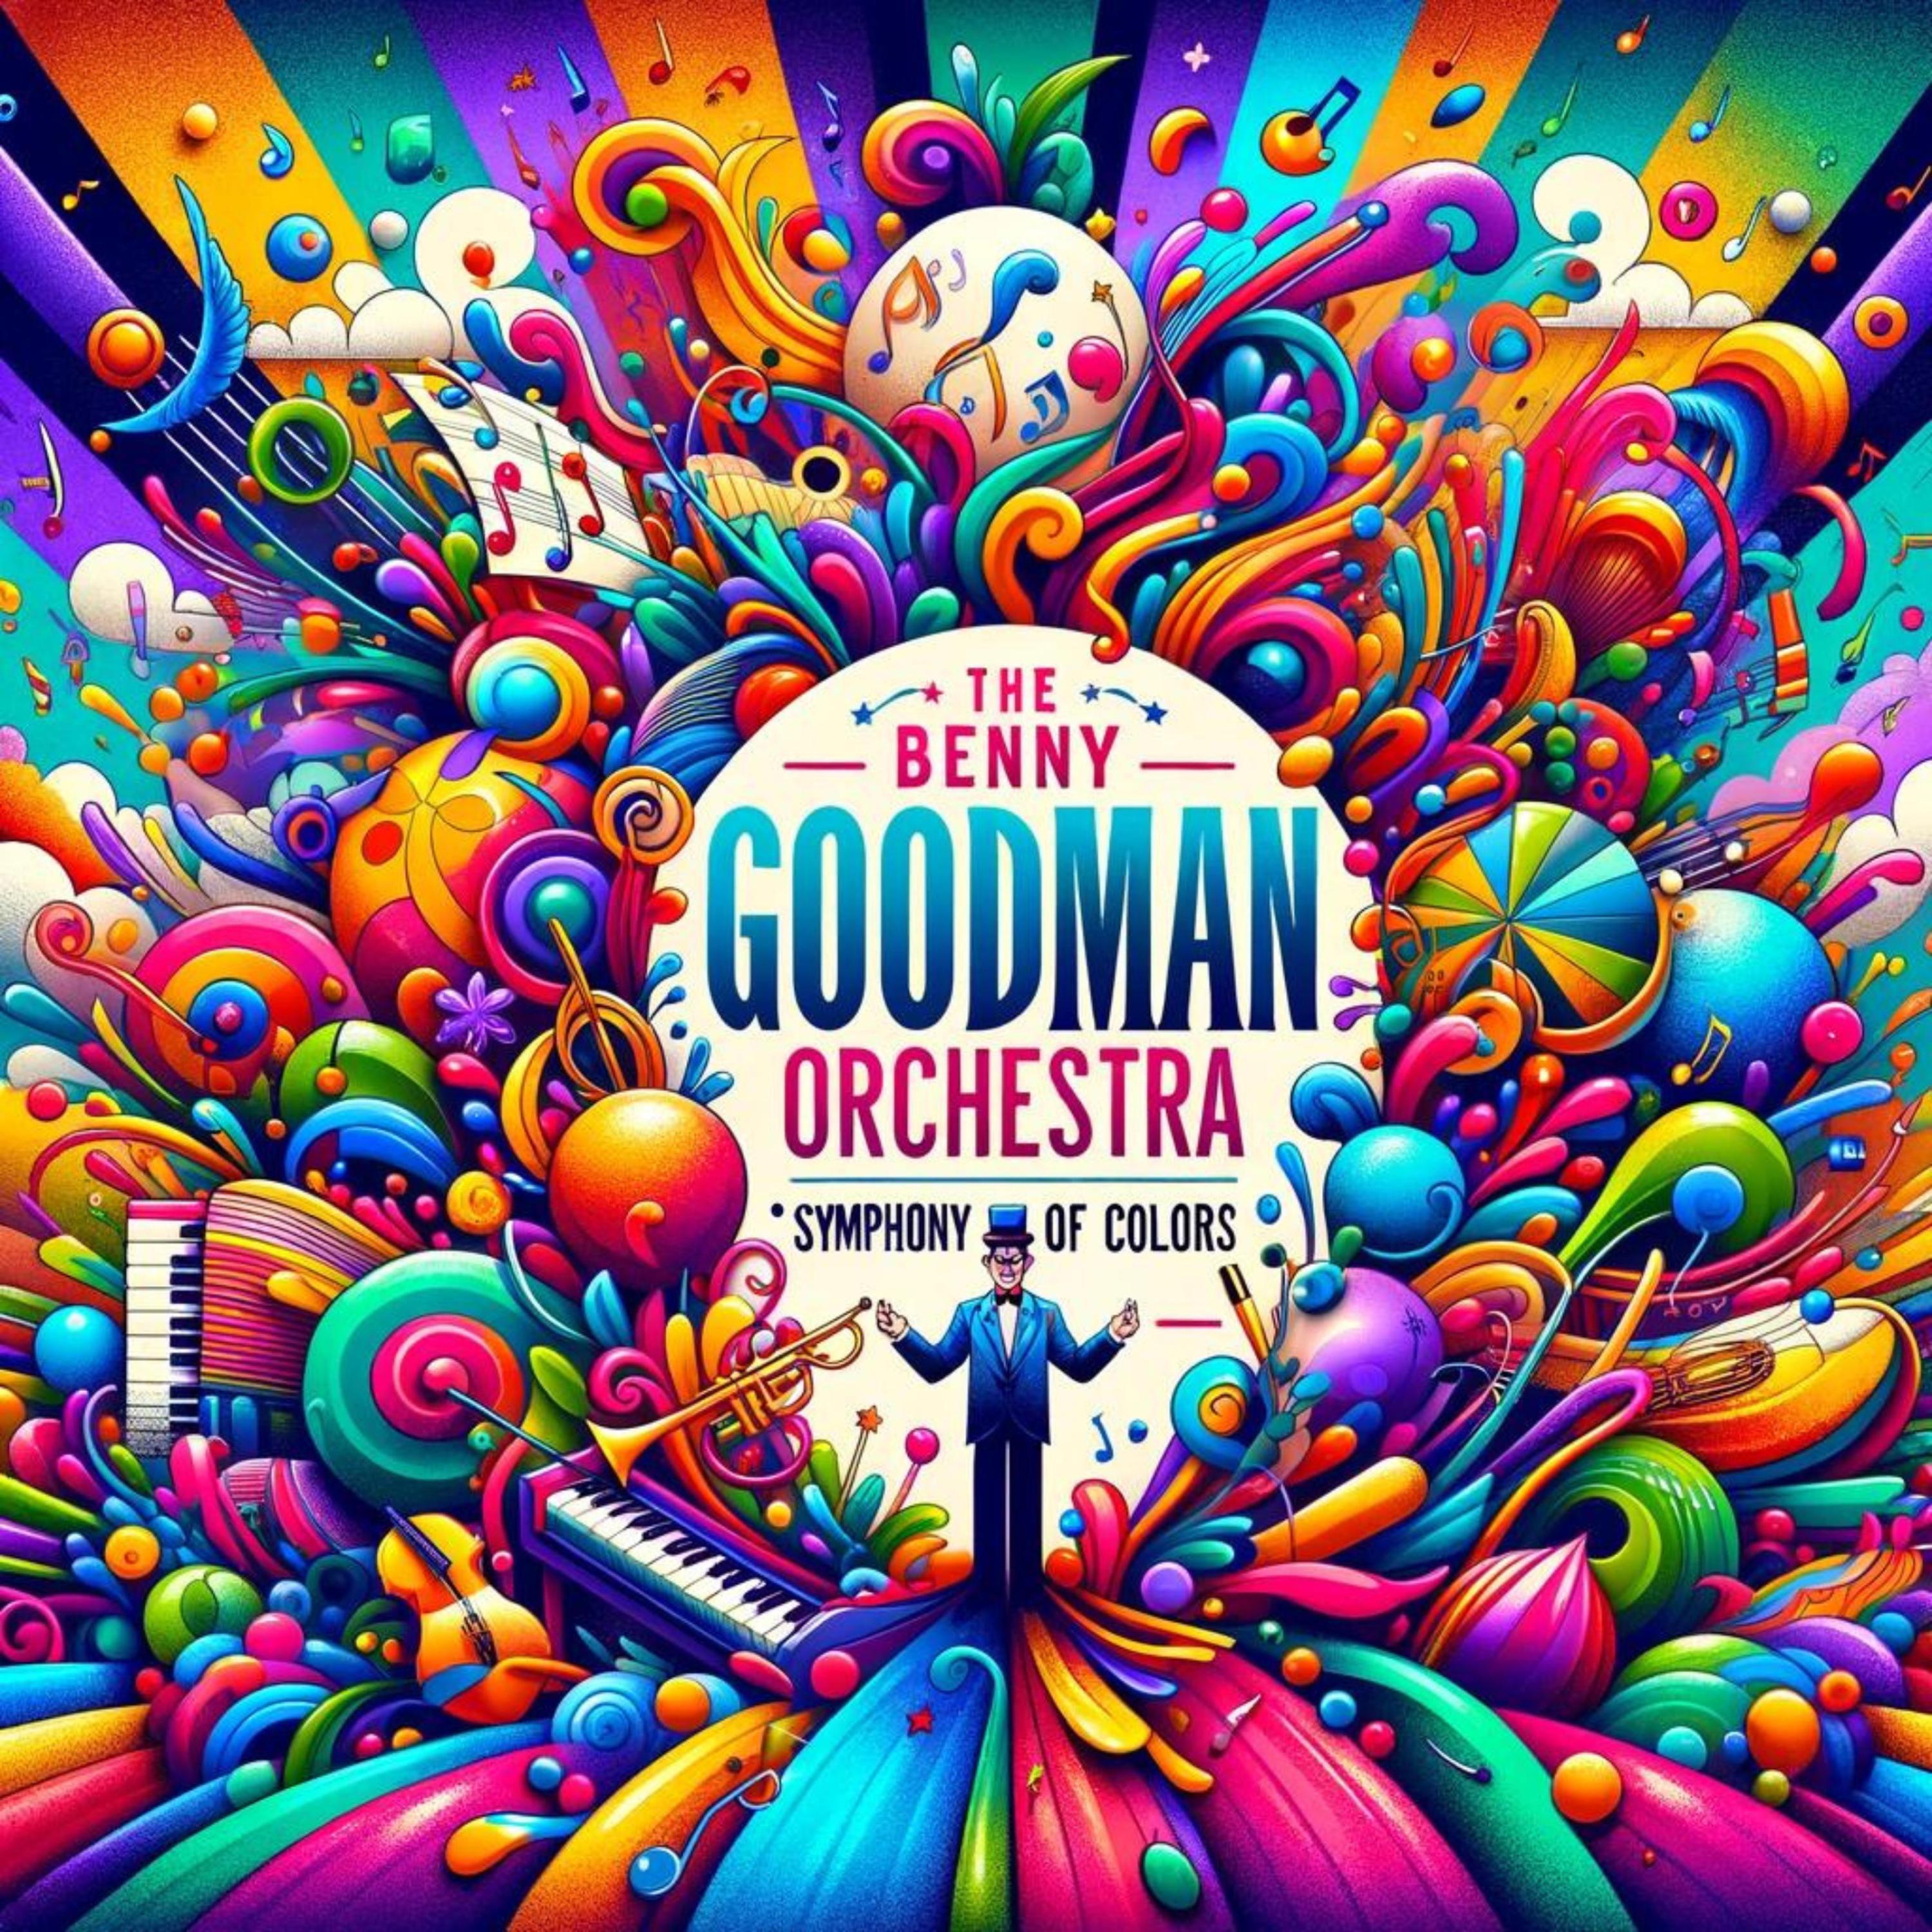 The Benny Goodman Orchestra - Symphony of Colors